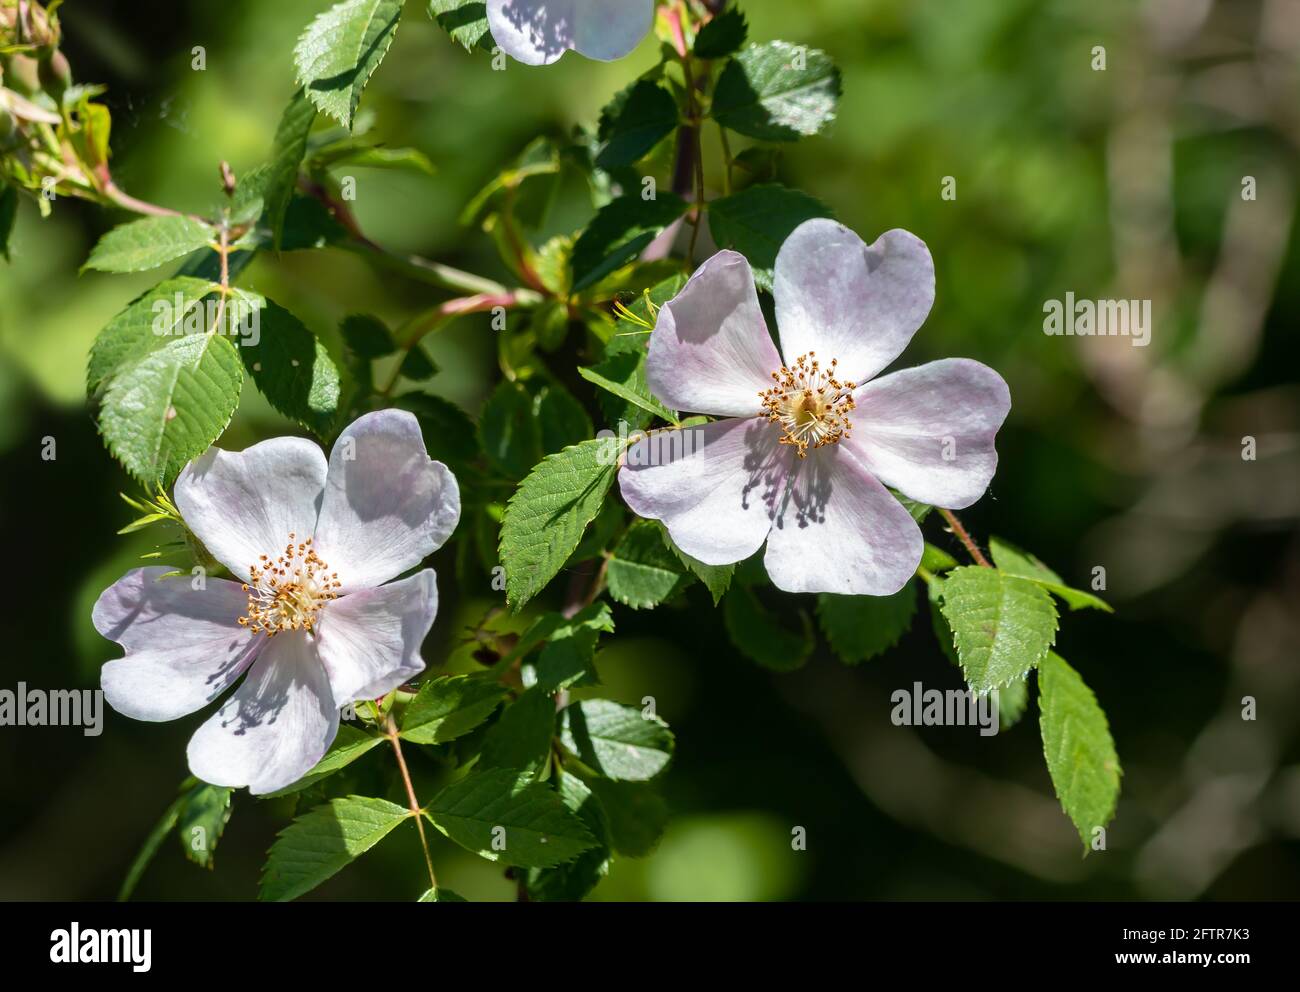 Rosa canina, commonly known as the dog rose, is a variable climbing, wild rose species native to Europe, northwest Africa, and western Asia. It is a d Stock Photo